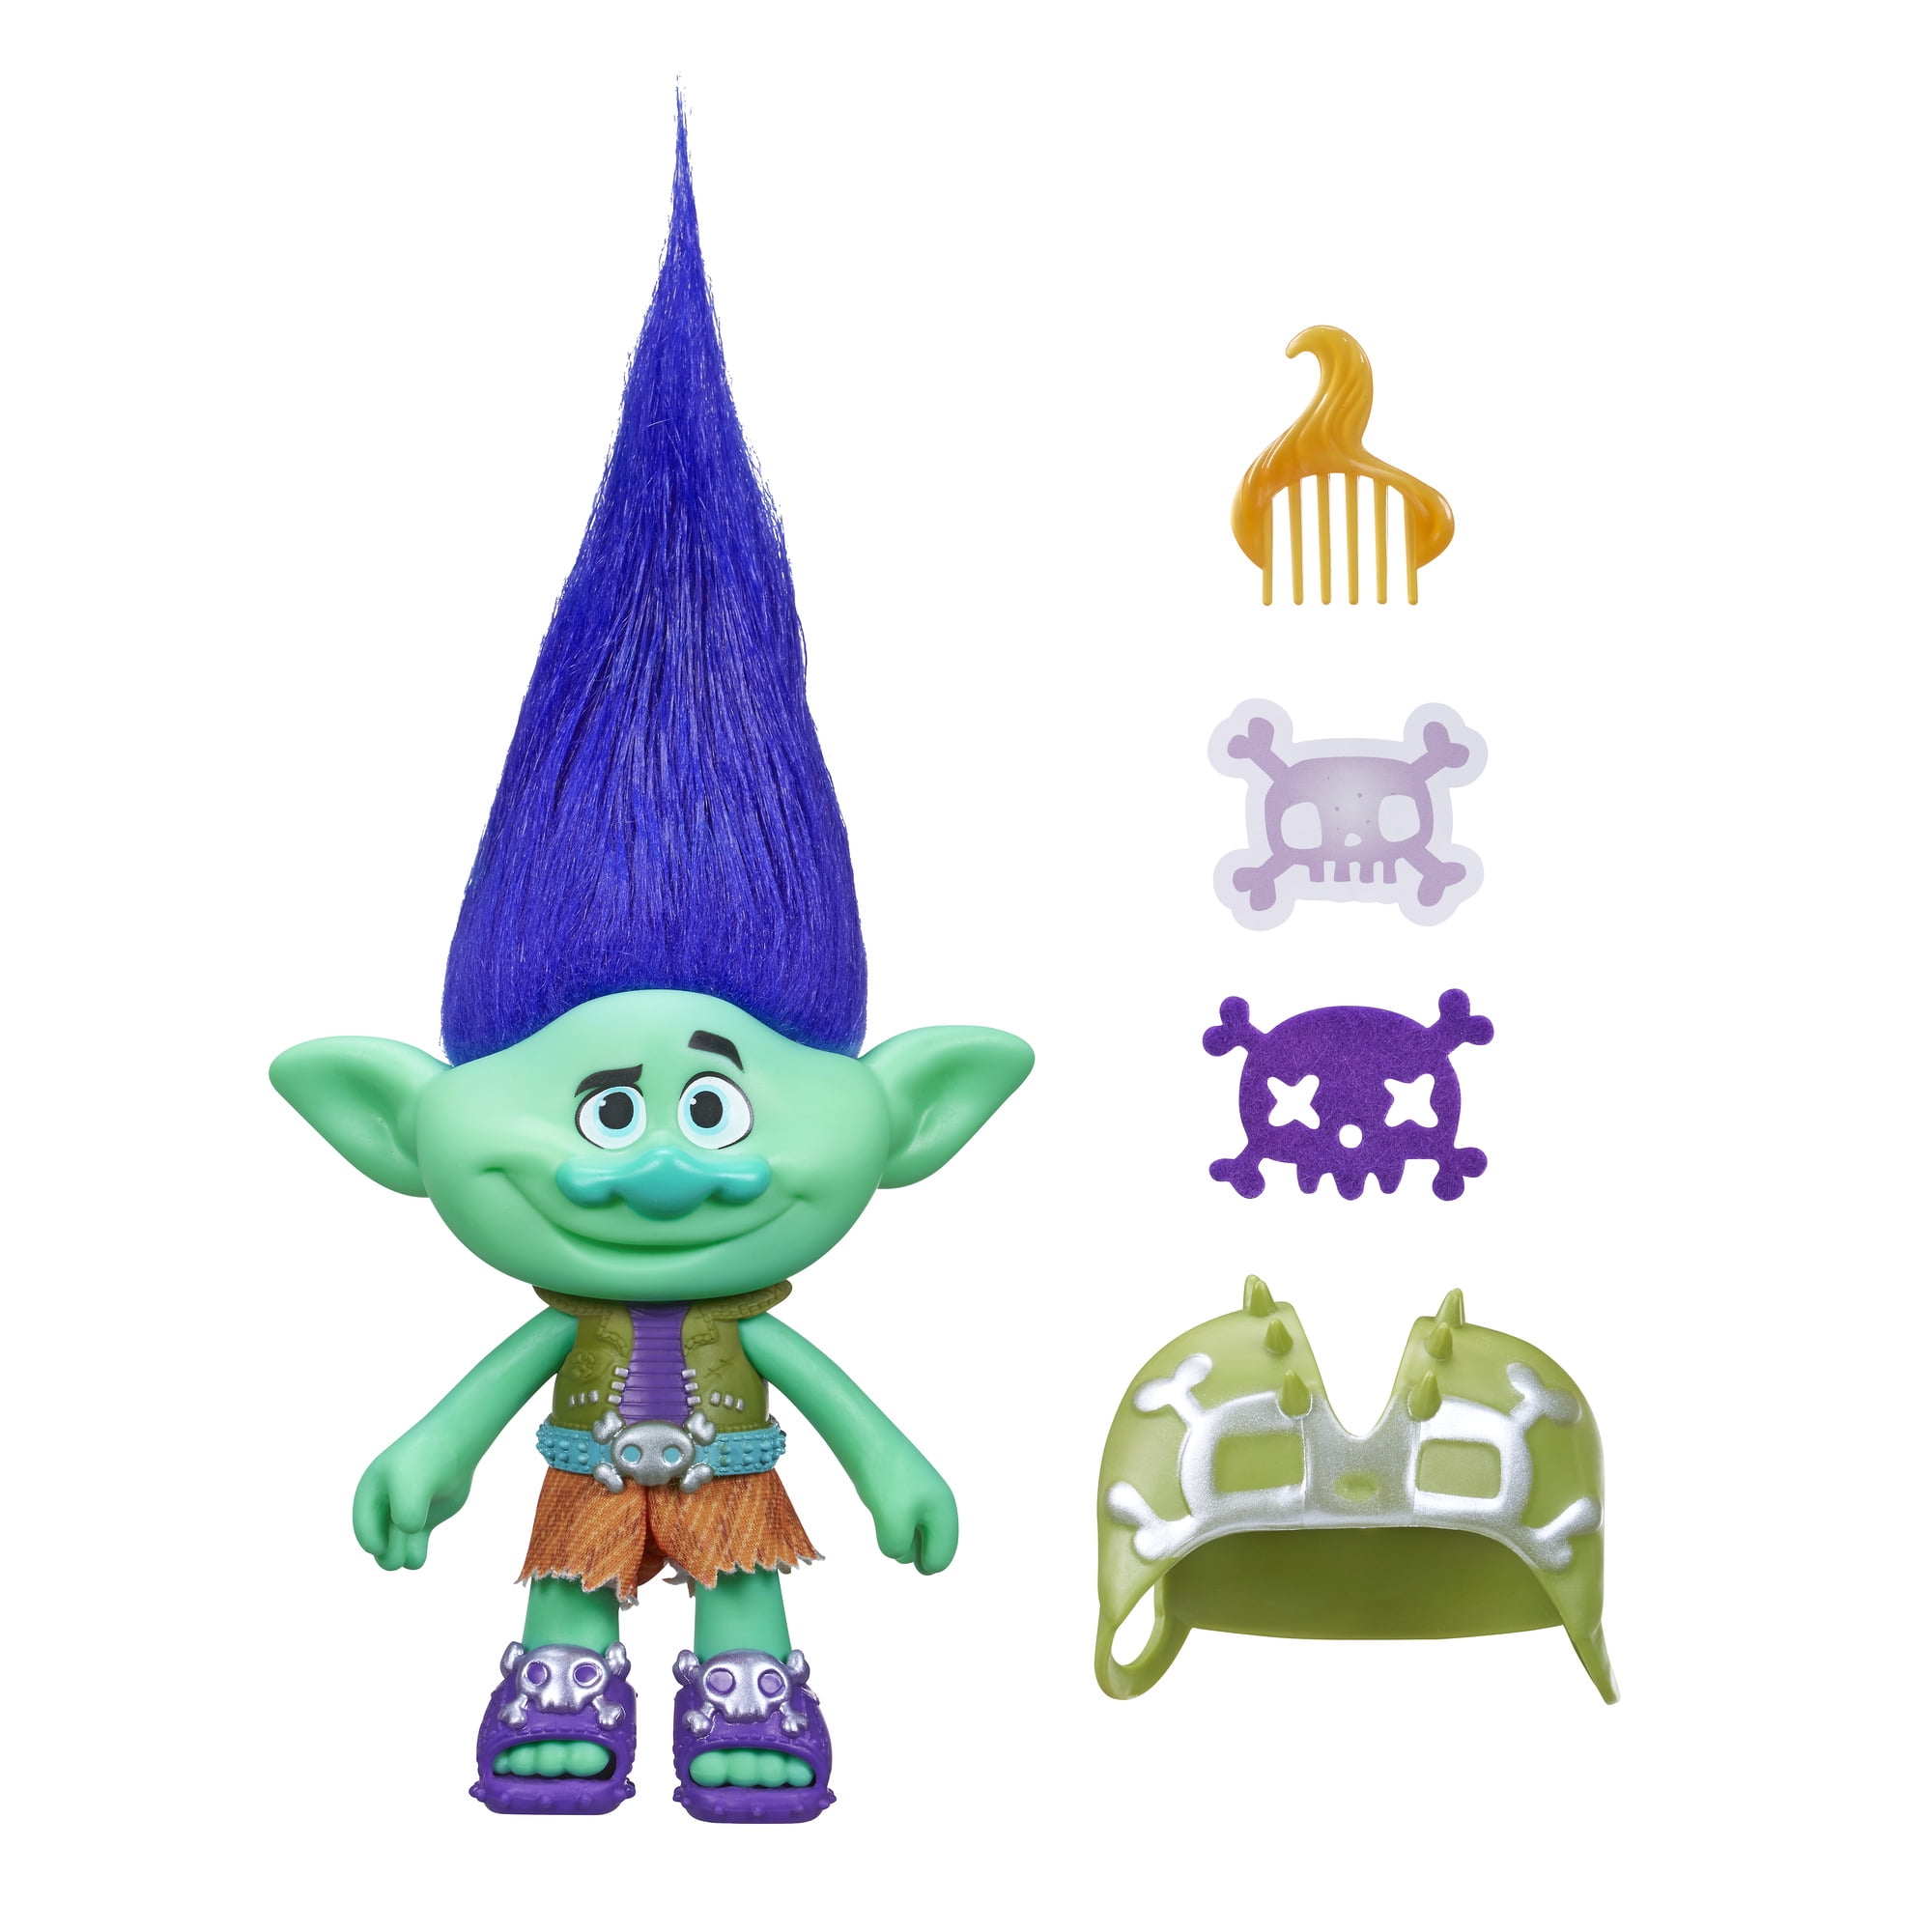 Hasbro Trolls Branch DreamWorks 9 Inch Figure With Accessories for sale online 